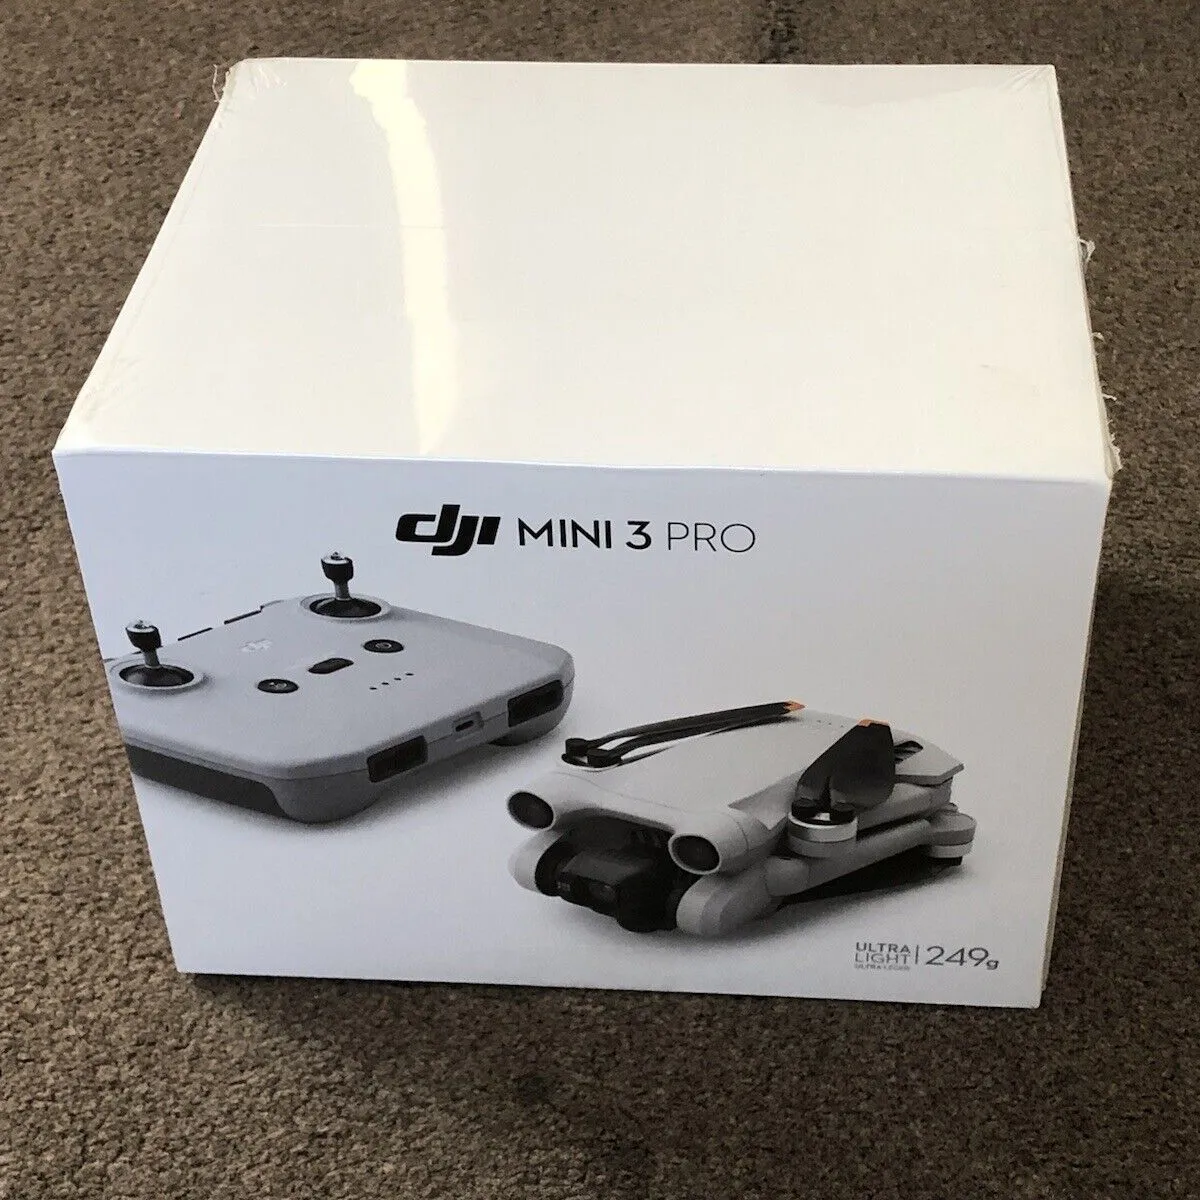 Hot Sale 100% Original and Brand new Sealed for DJI Mini 3 Pro Drone with Remote Controller New Arrive